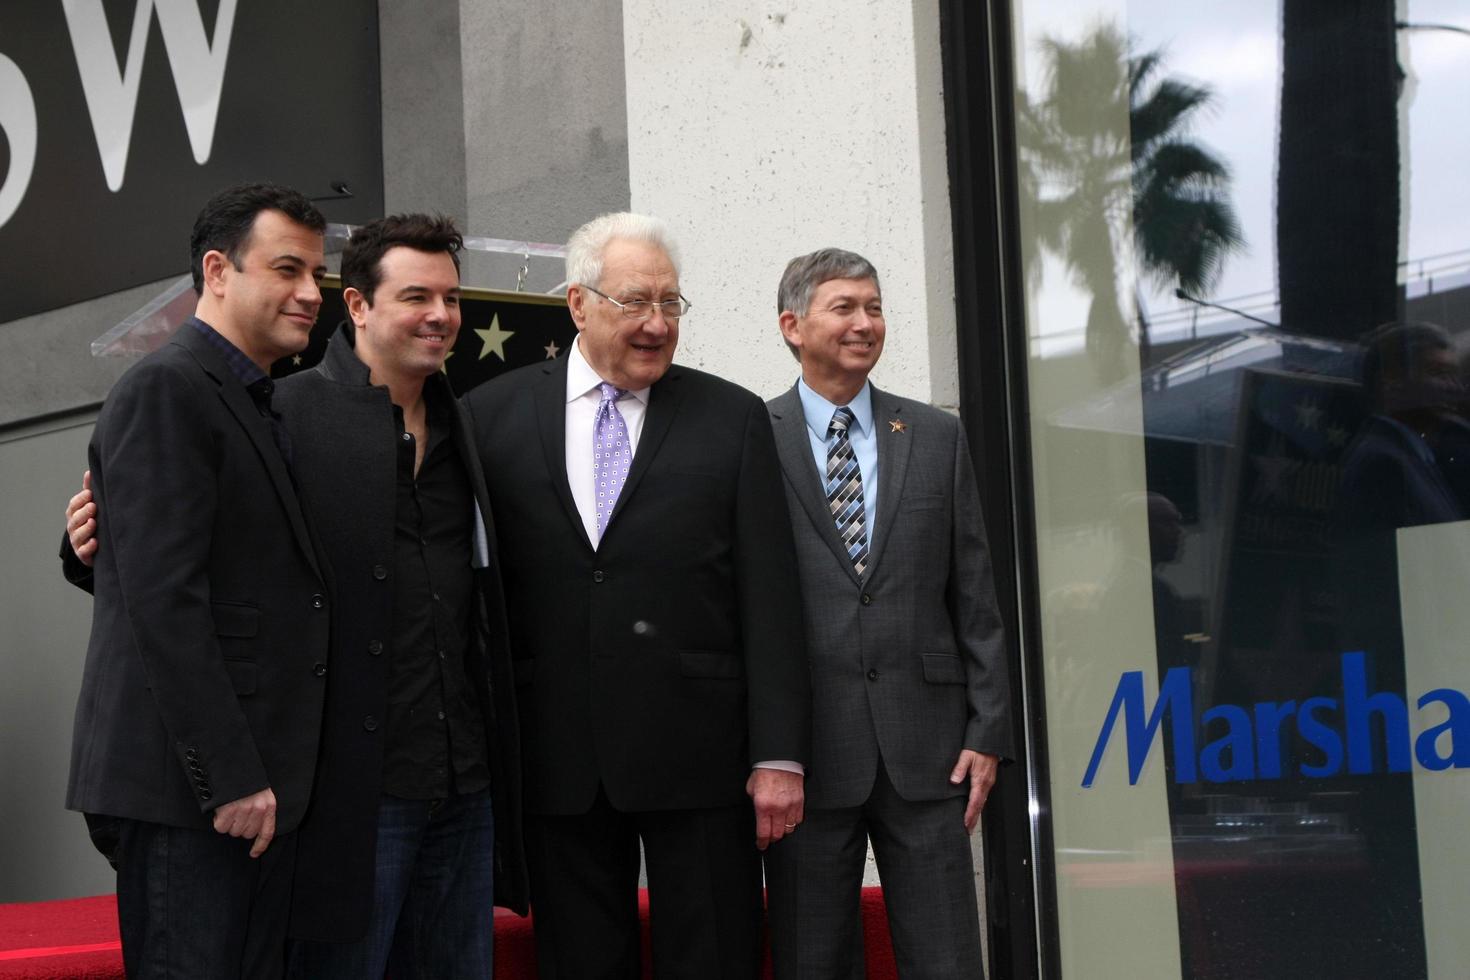 LOS ANGELES, DEC 11 -  Jimmy Kimmel, Seth MacFarlane, Don Mischer, Leron Gubler at the Don Mischer Star on the Hollywood Walk of Fame at the Hollywood Boulevard on December 11, 2014 in Los Angeles, CA photo